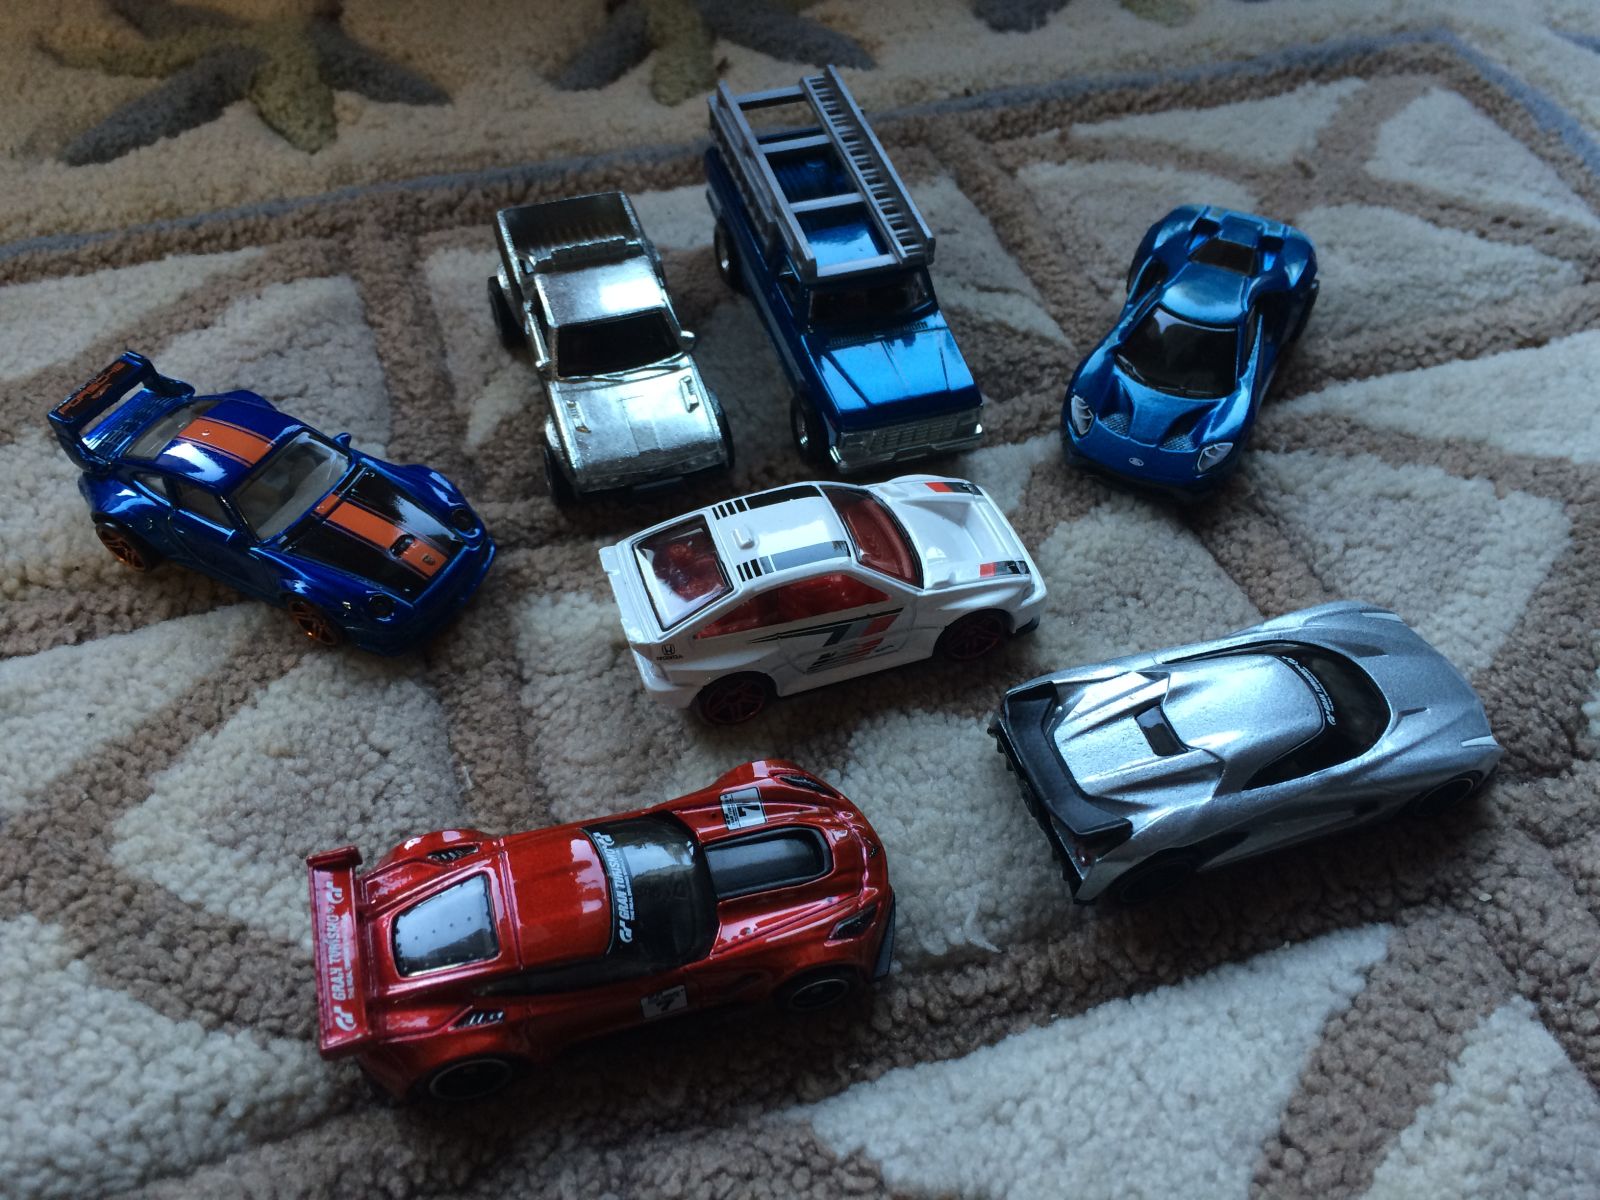 The GT series and Ford GT are the more ‘popular’ cars which usually don’t interest me as much but they’re pretty good castings so I got them anyway!